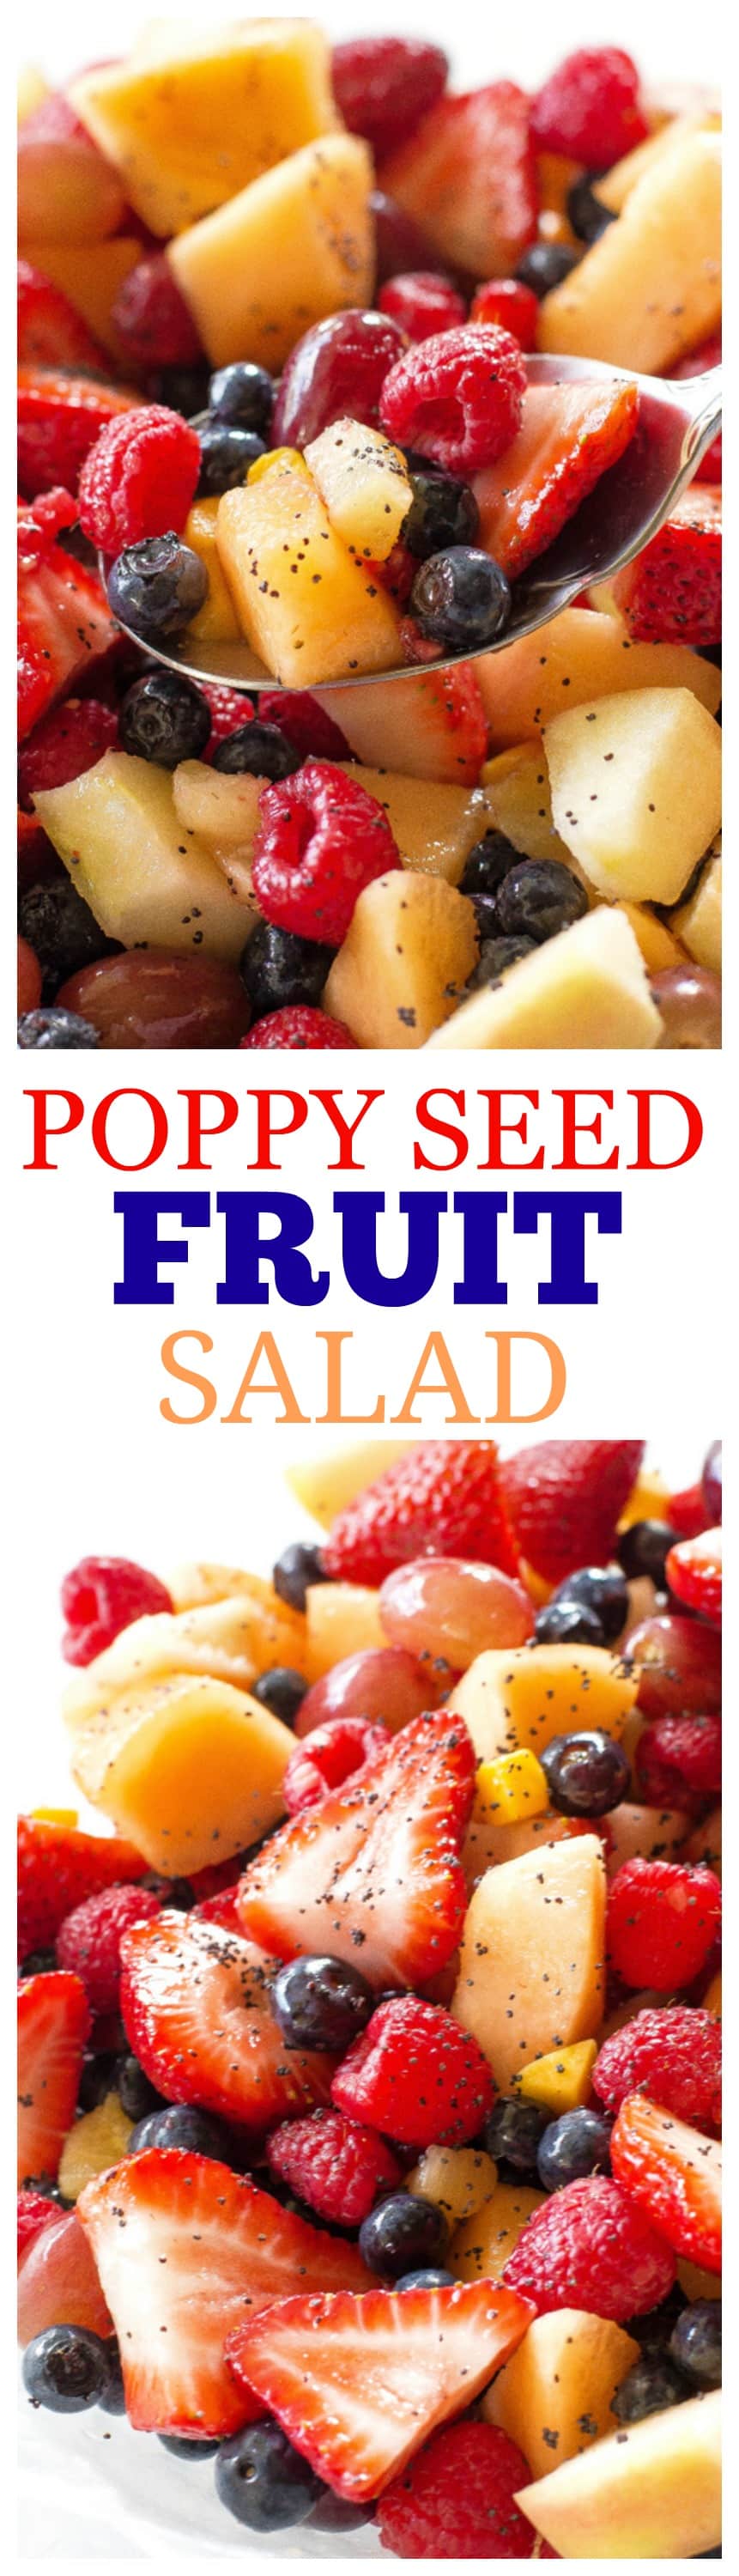 Poppy Seed Fruit Salad - sweet with a bright citrus flavor, honey, and a little bit of ginger. #poppy #seed #fruit #salad #recipe